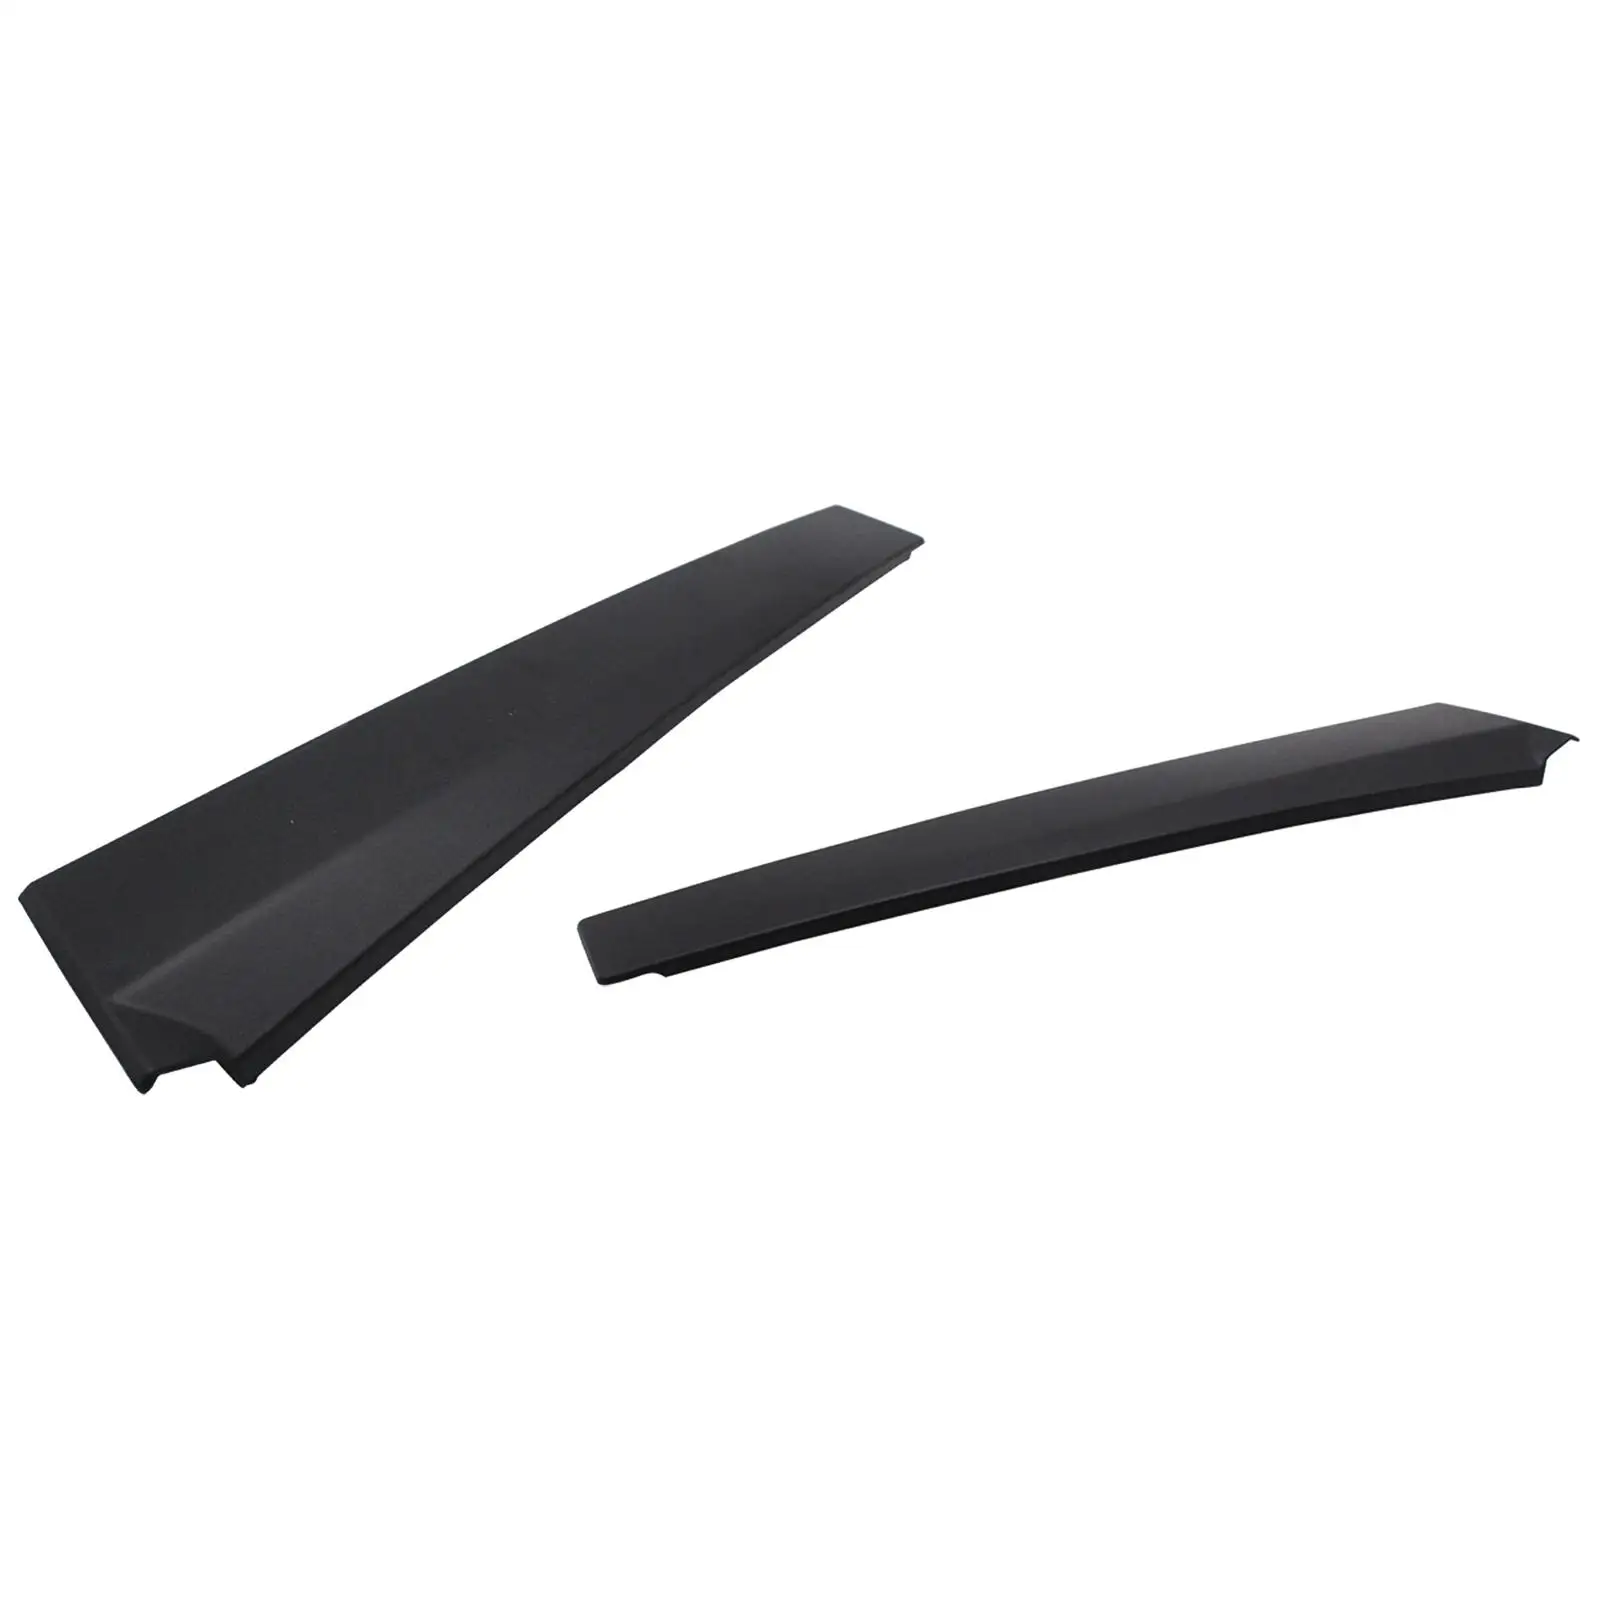 Vehicle Door Pillar Trim Moulding 1473662 2S51 B20898Ag 2S51B20898Ag for Ford Fiesta MK6 2001-2008 Accessories Durable